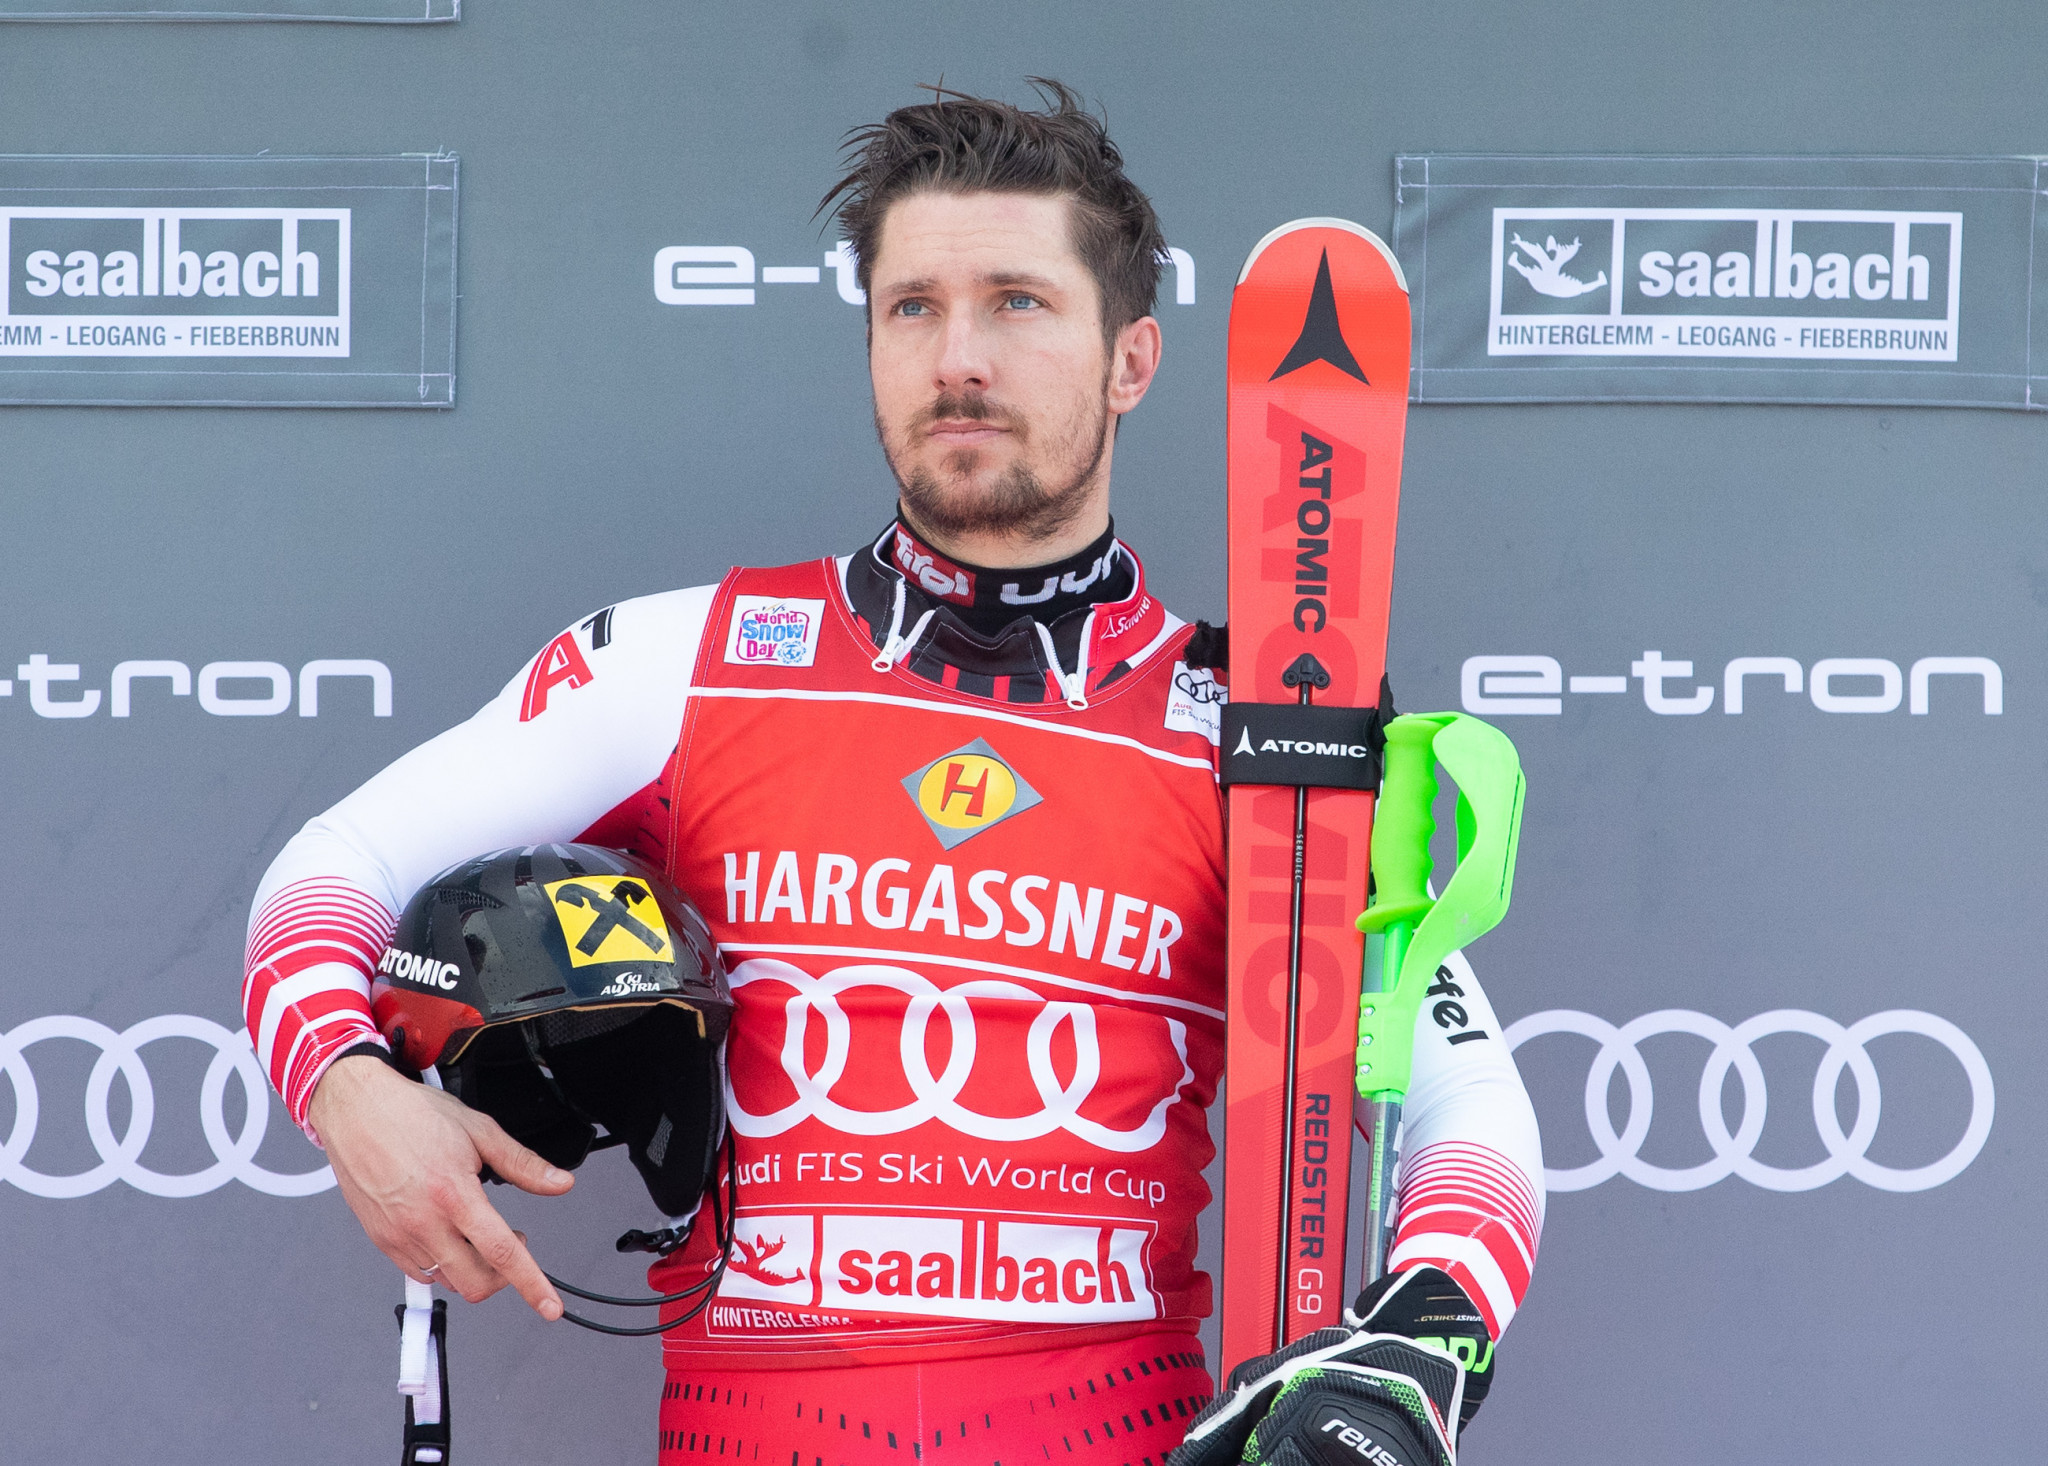 Hirscher wins slalom event at FIS Alpine Skiing World Cup to become greatest Austrian skier of all time 